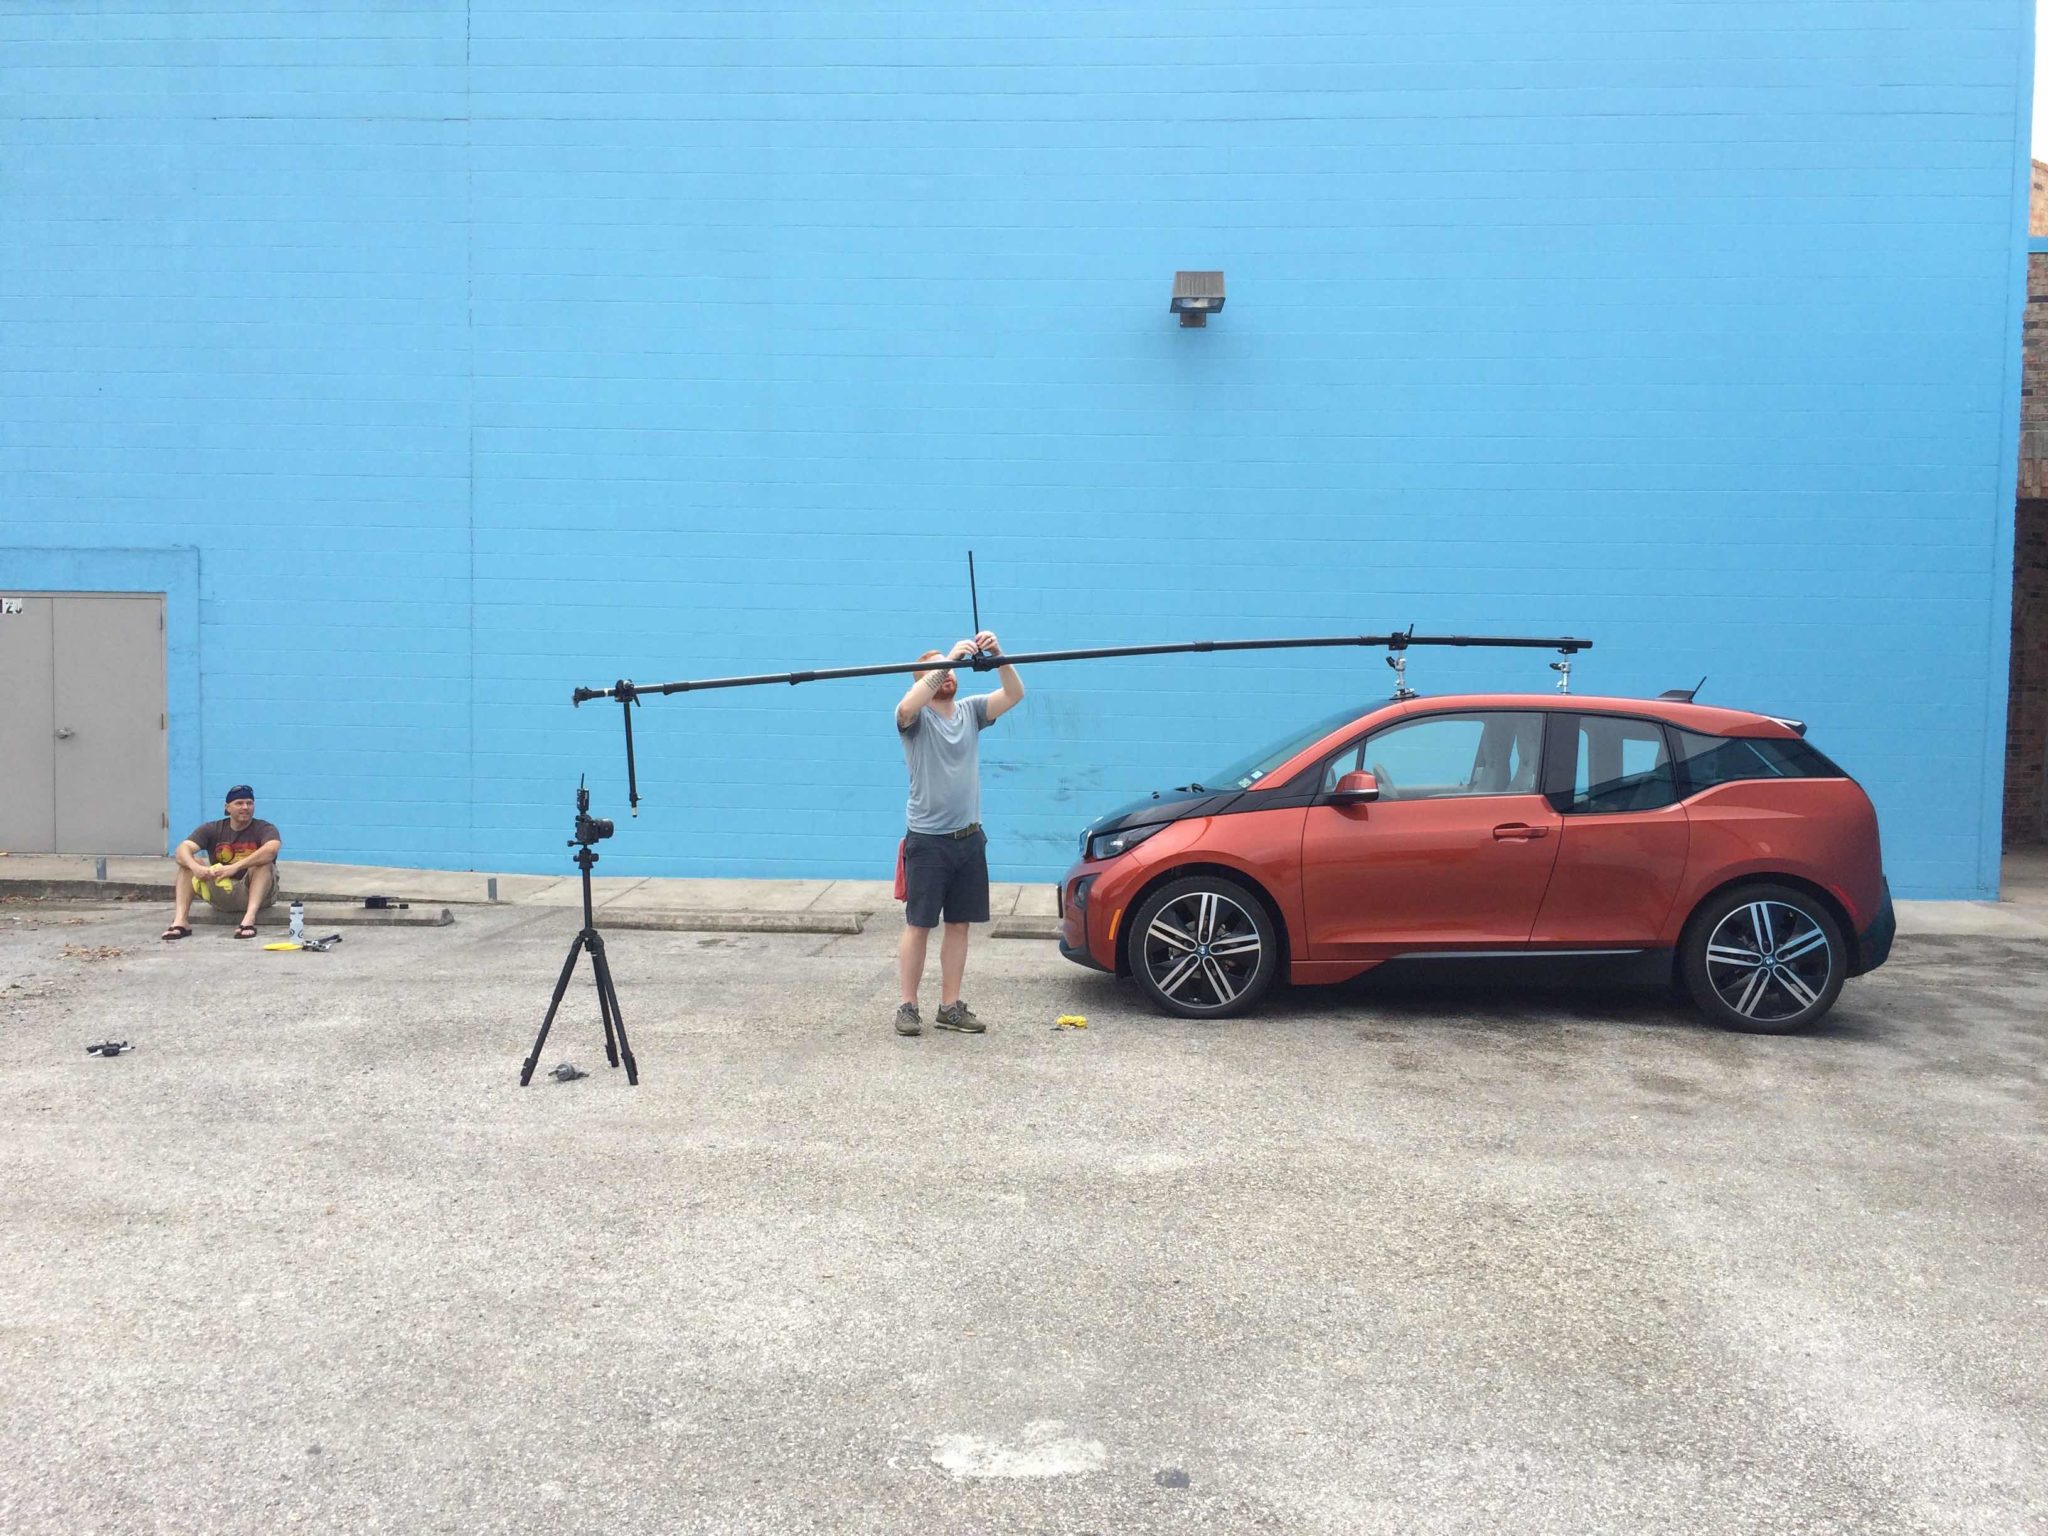 DTKAustin shares a recent photoshoot with Cody Hamilton and an electric BMW i3. Click for more photos and info.